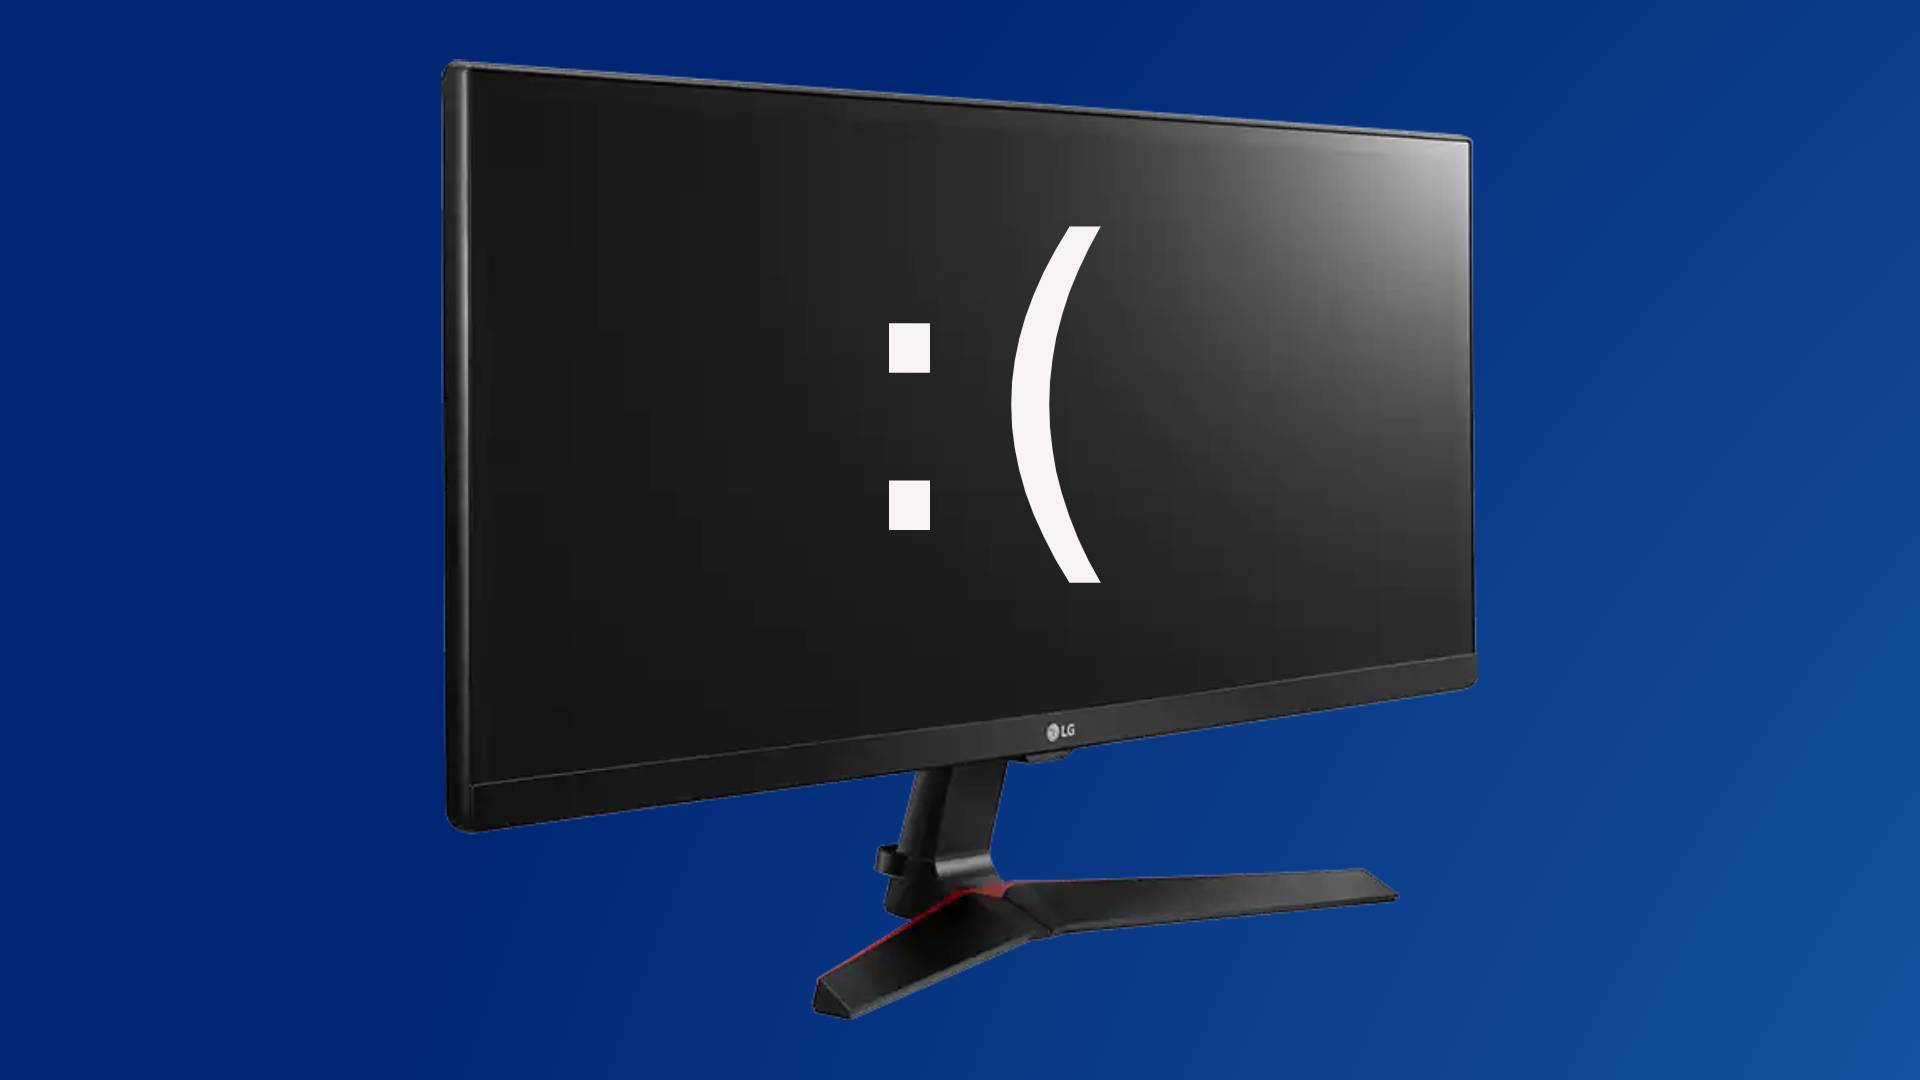 Gaming monitors could become a complicated mess, thanks to HDMI